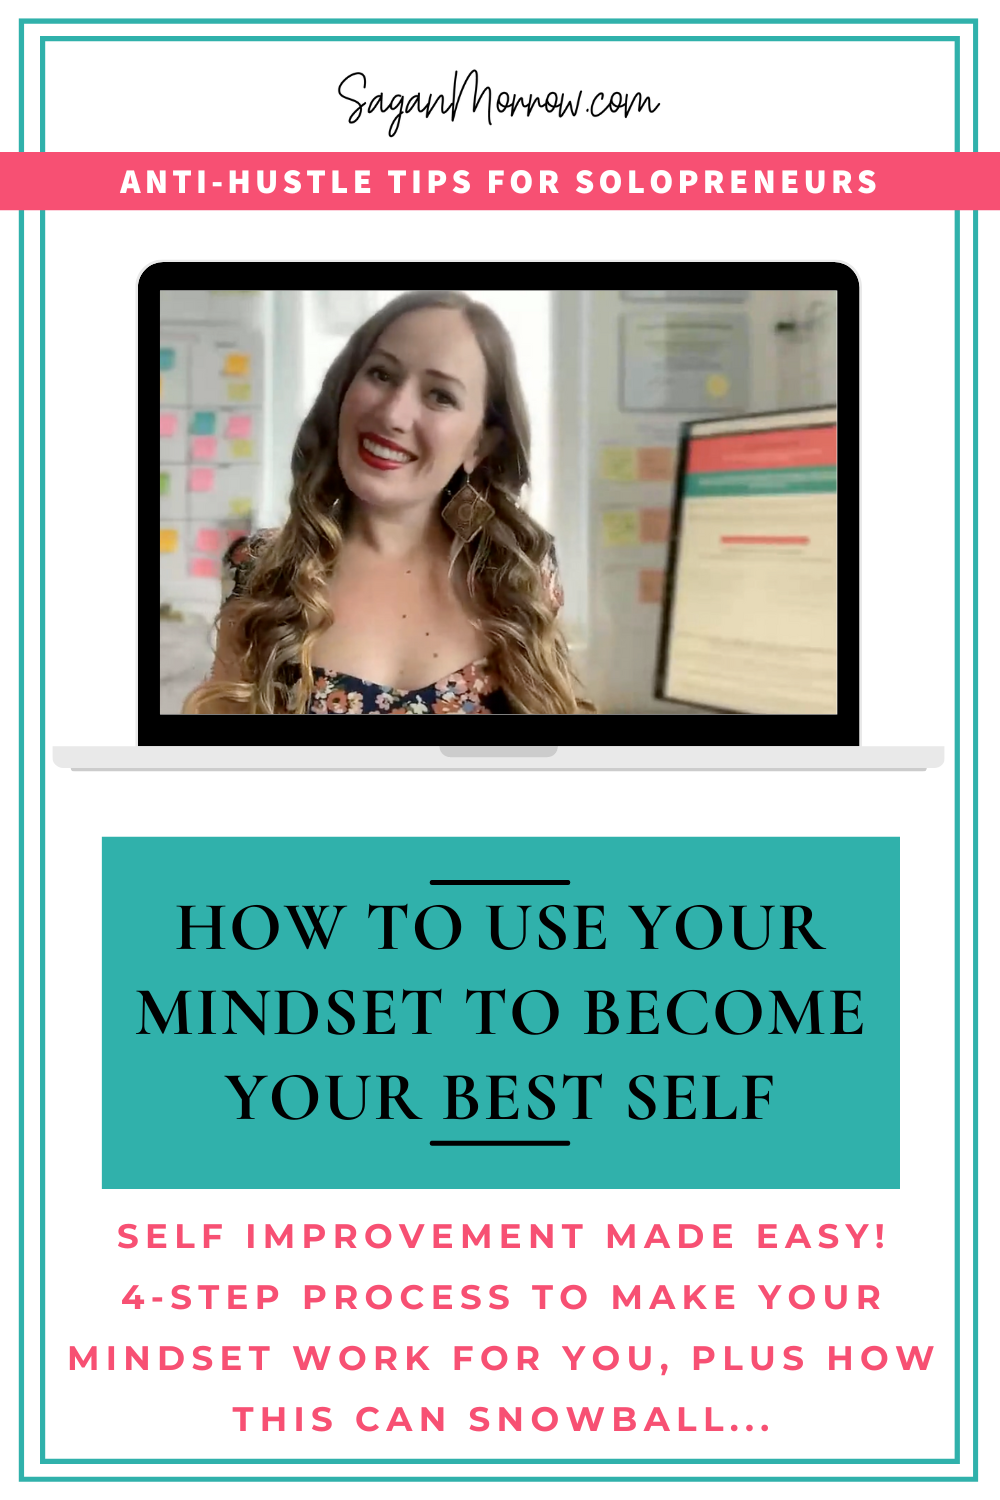 Ready for self improvement? You can use mindset shifts to become your best self! This is self improvement made easy… Find out the 4-step process to make your mindset work for YOU that I use in life coaching sessions with my clients (if you’ve ever wondered questions like, “What is mindset coaching? How can a mindset coach help me, what can mindset shifts do for me, and how can mindset coaching benefit me?” then this is also a must-watch video for you!)